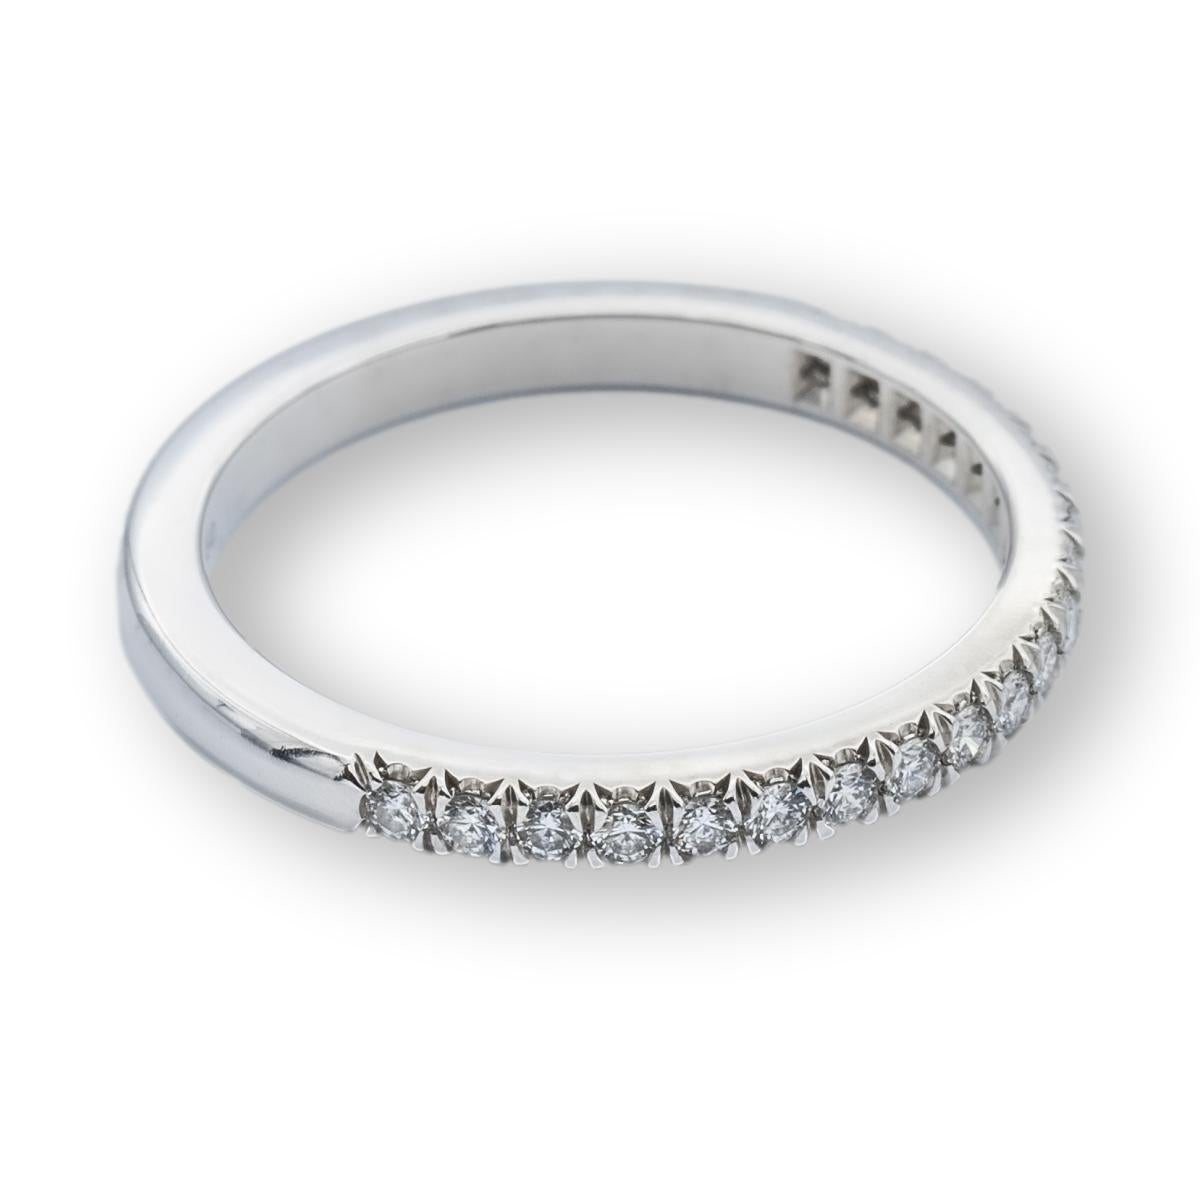 Tiffany & Co. Soleste Wedding/Anniversary Half-Band finely crafted in Platinum with 20 round brilliant cut diamonds weighing 0.17 carats total weight encrusted in 